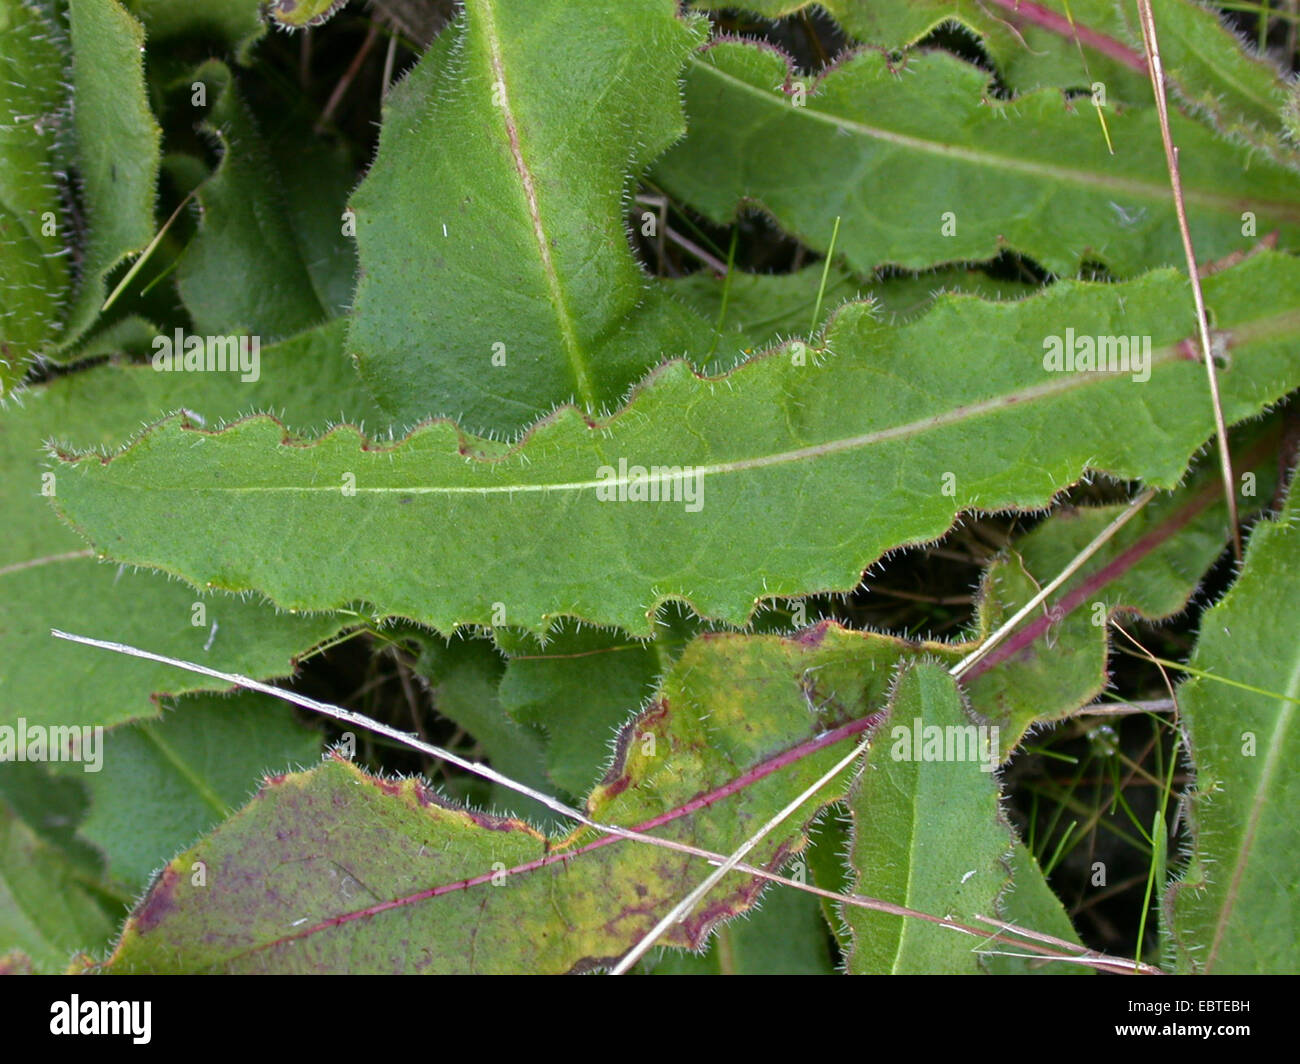 hawkweed oxtongue (Picris hieracioides), leaf, Germany Stock Photo